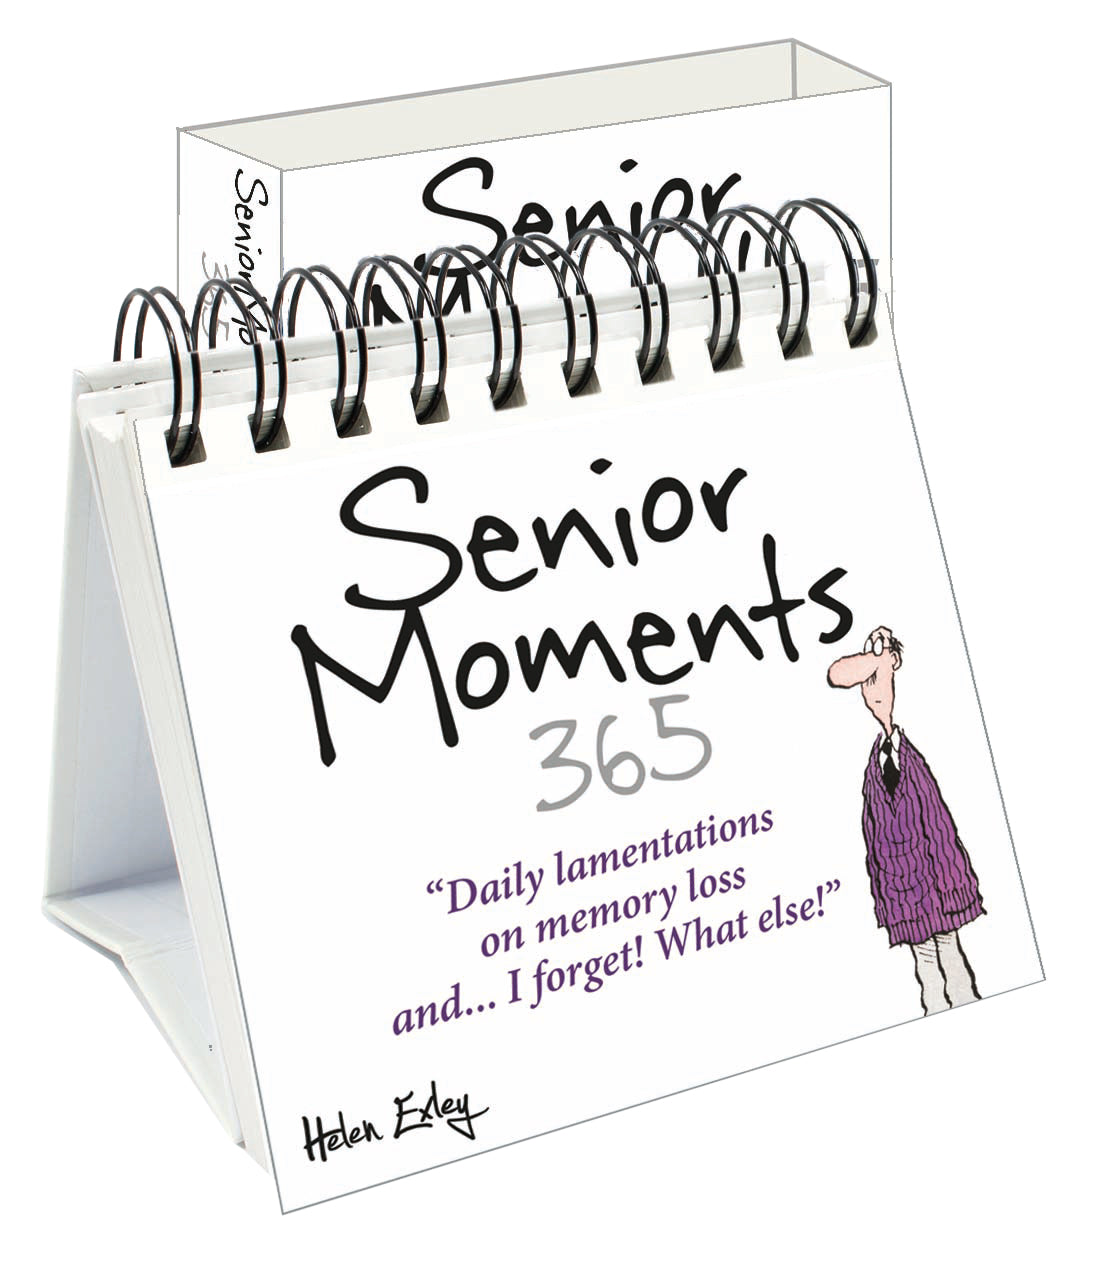 365 Senior Moments - Daily lamentations on memory loss and...I forget! What else?